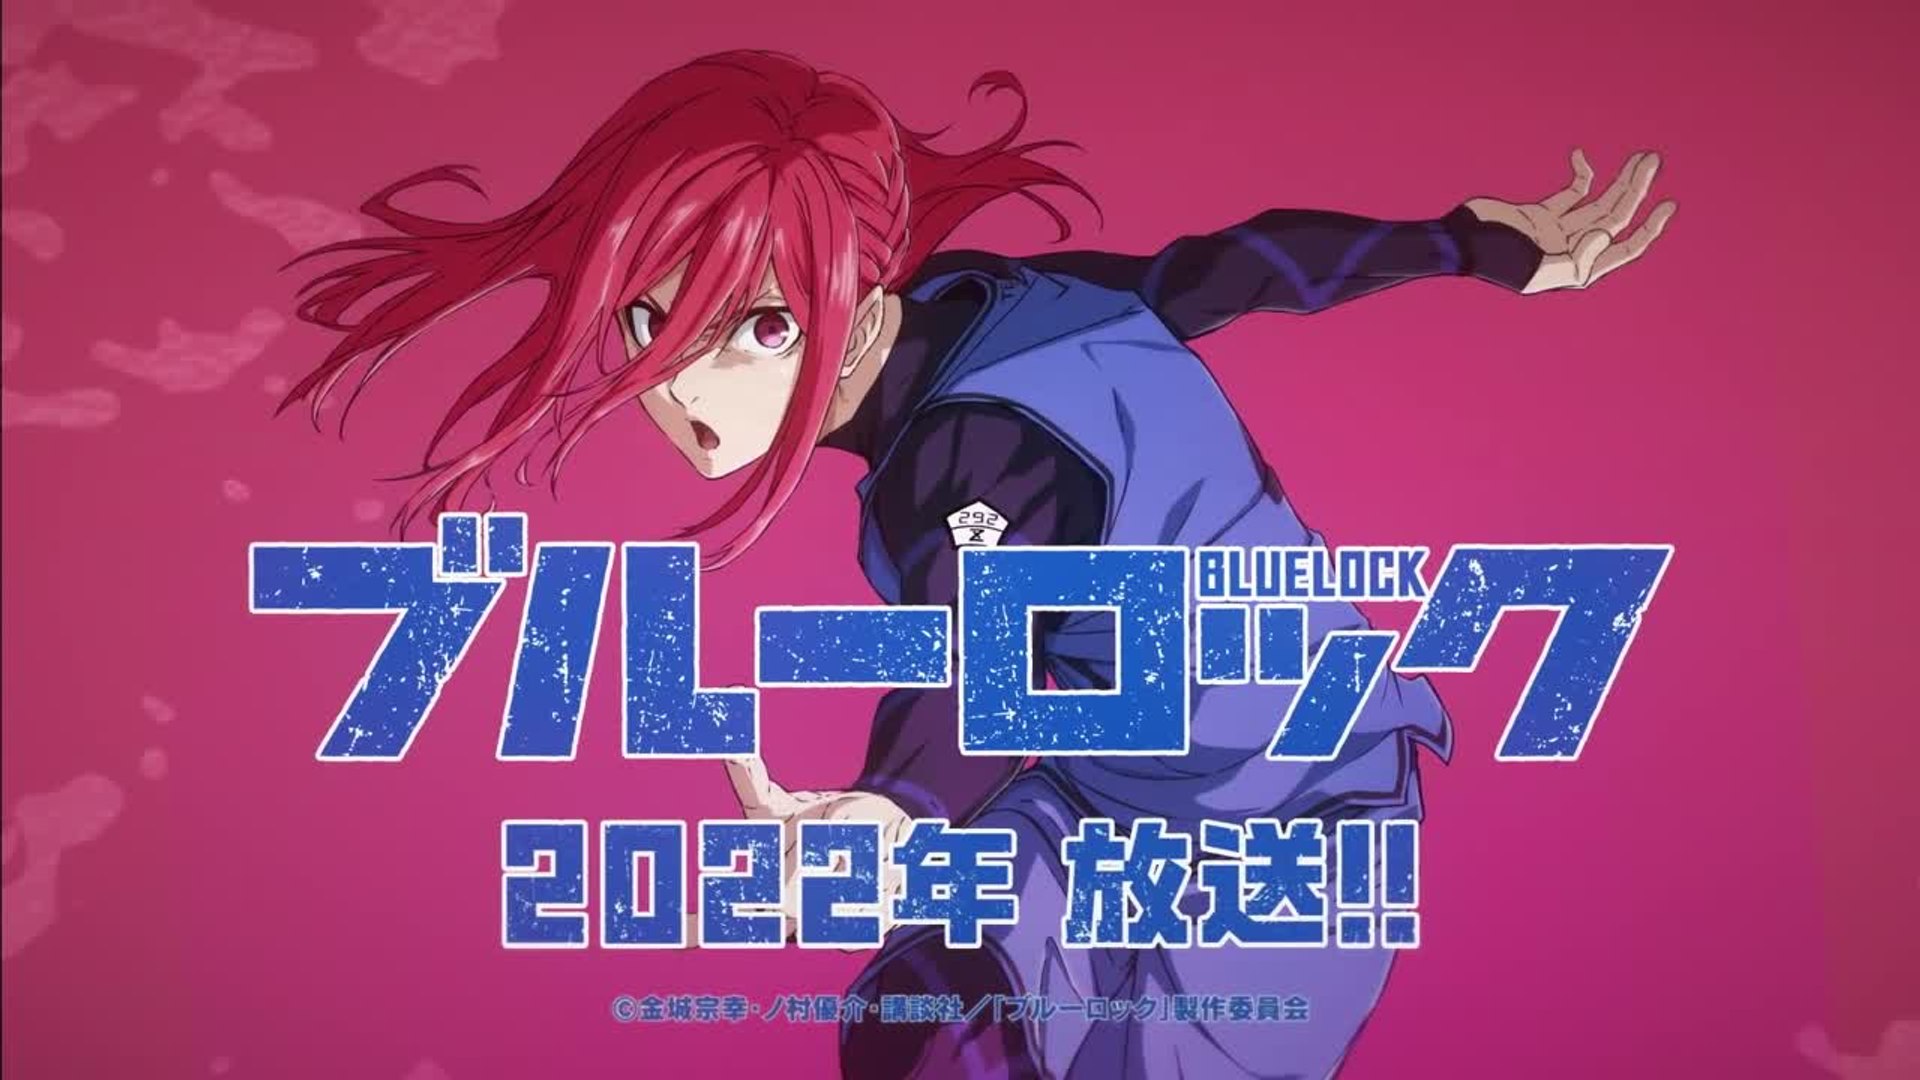 Blue Lock Episodes by Anime Series - Dailymotion